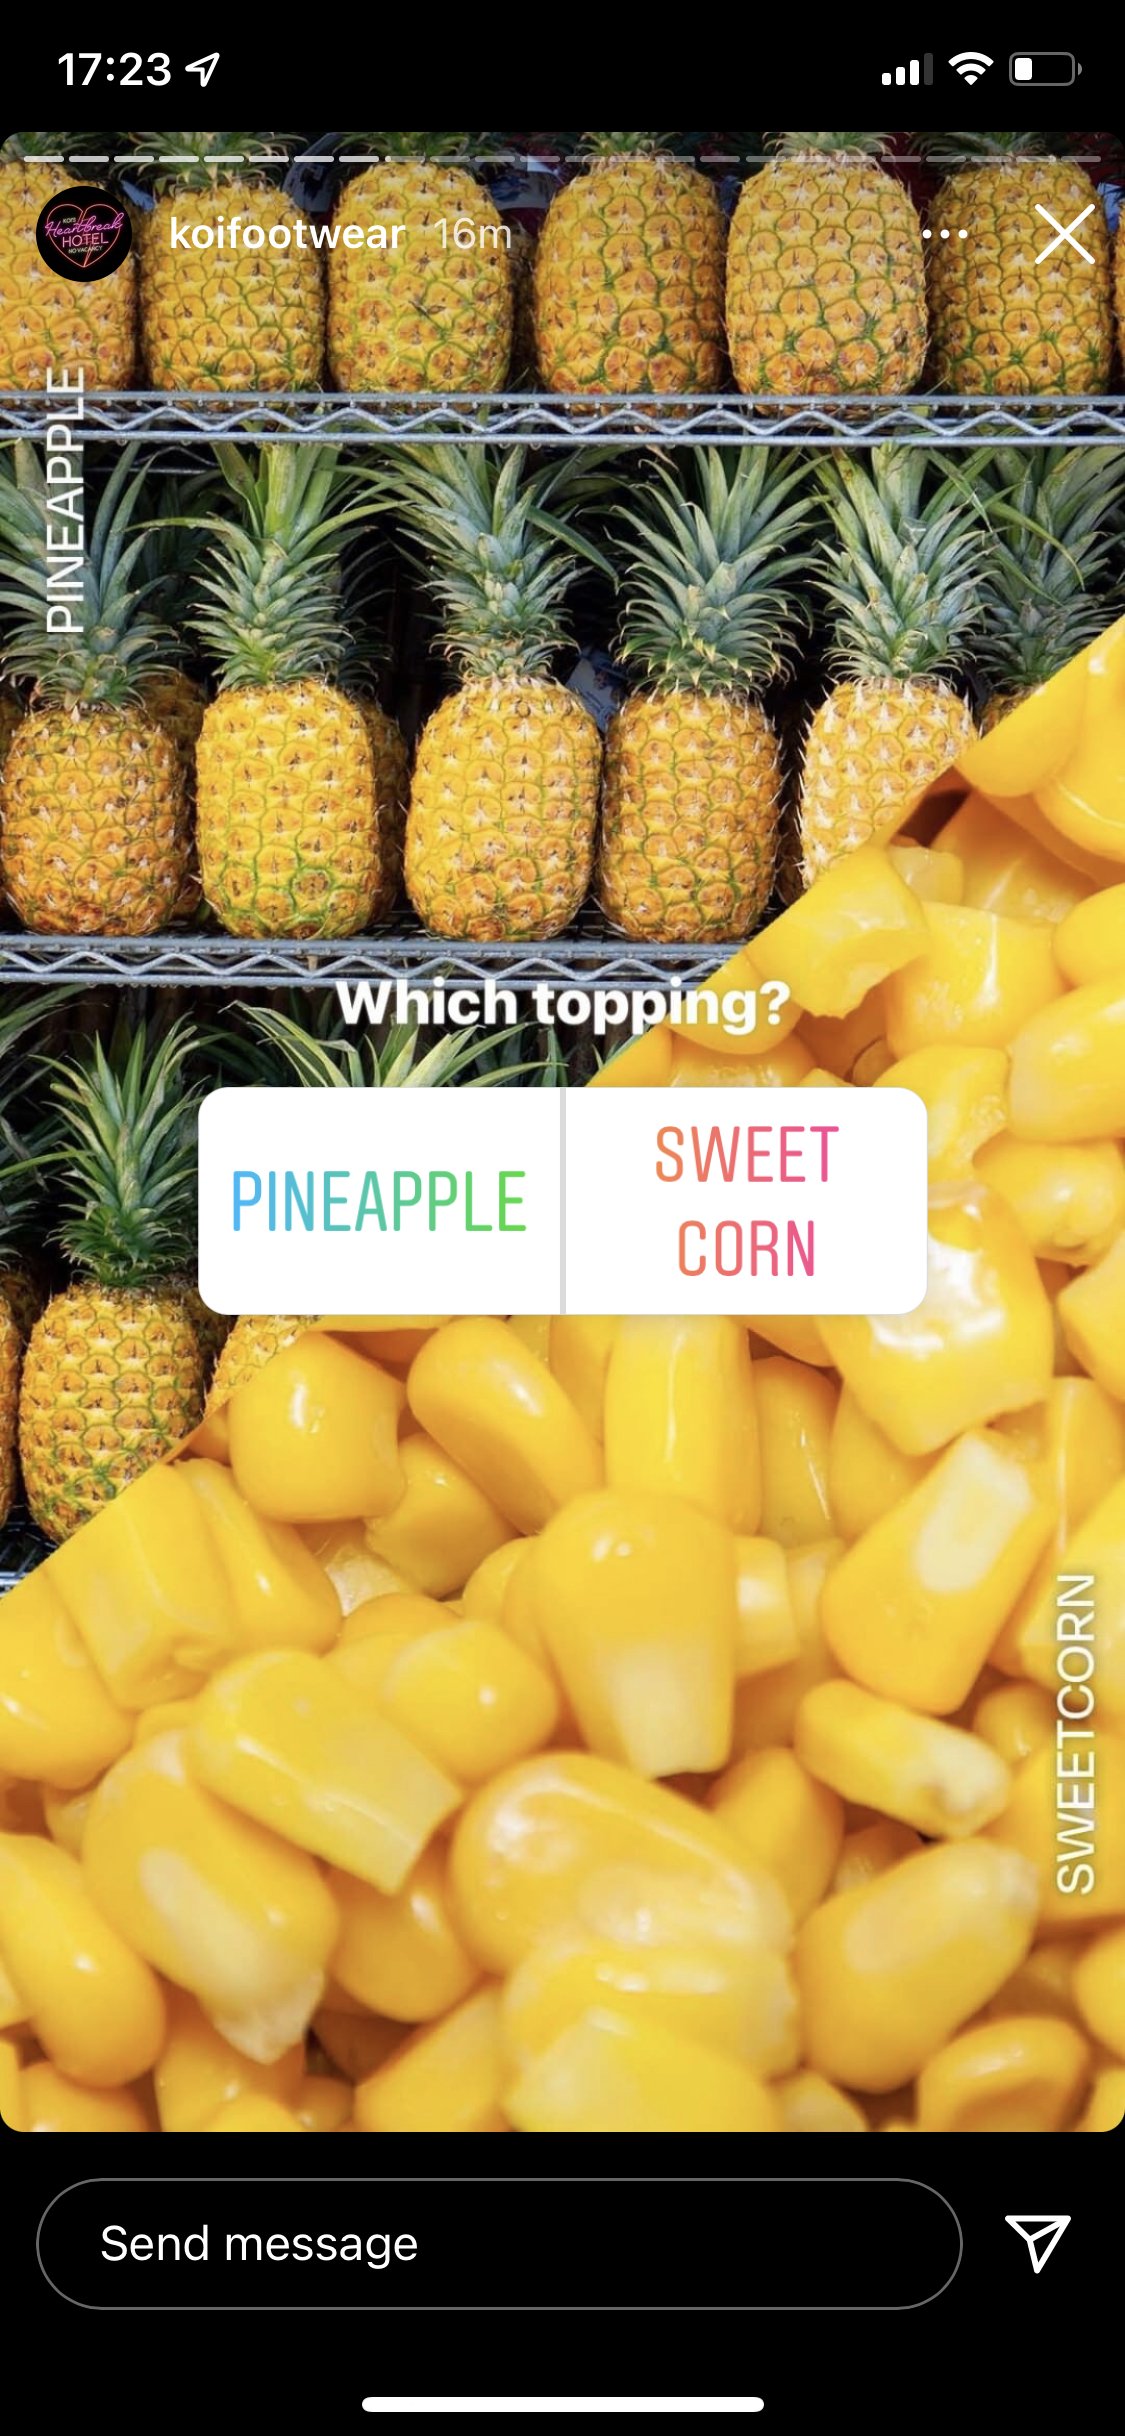  Screenshot of Koi Footwear story. Asks, ‘which topping?’ with ‘pineapple’ and ‘sweetcorn’ being the two Answer options. The background is an image of both pineapples and sweetcorn.  